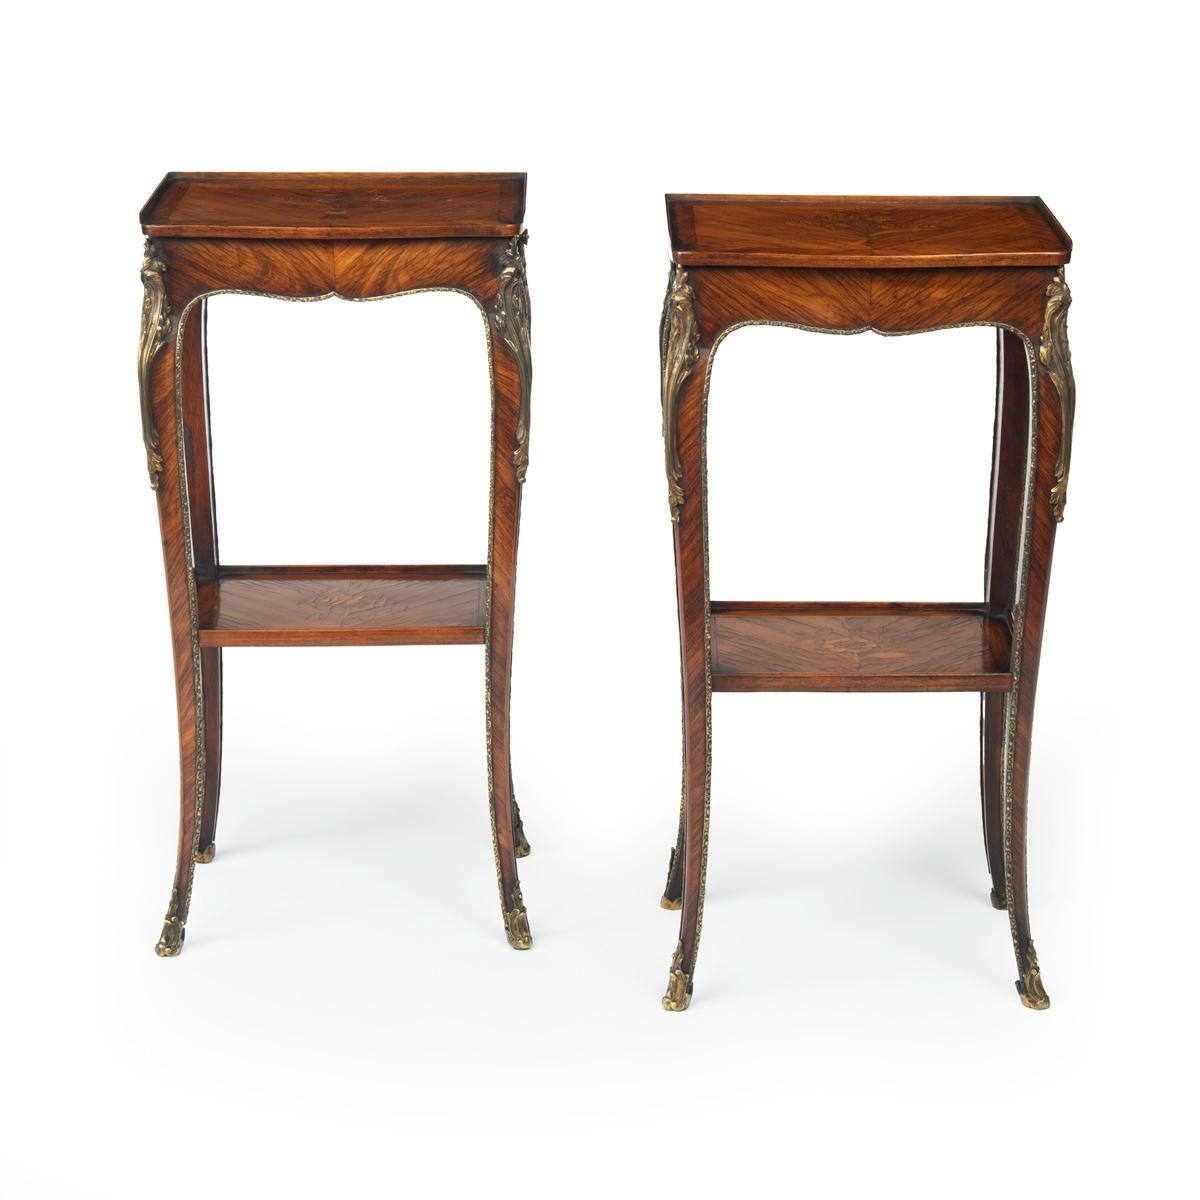 A pair of George III marquetry tables in the French taste, each of rectangular form, the top and under tier with a floral spray on a diagonal kingwood quarter veneered ground within kingwood cross banding, with a single frieze drawer at one end, the